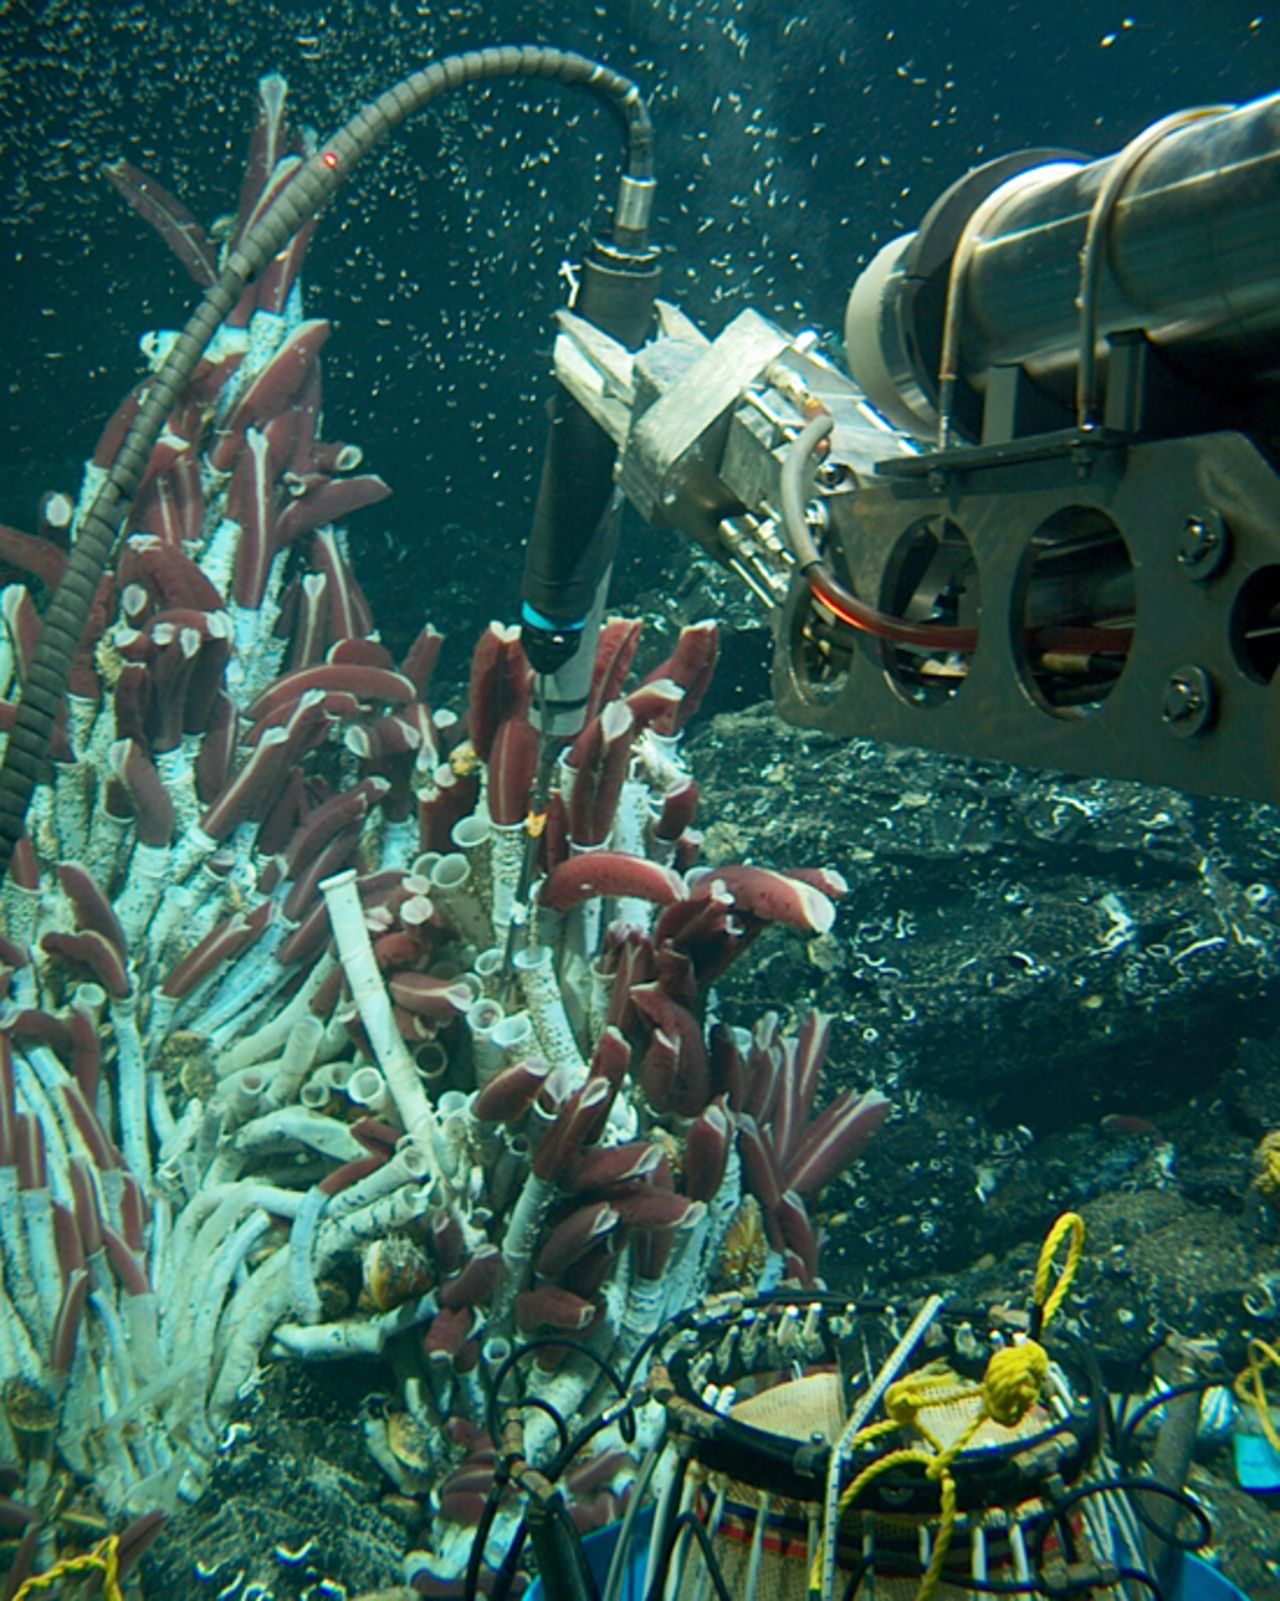 Alvin has two hydraulically powered robotic arms used by the pilot for deploying scientific equipment and collecting samples. Here it can be seen probing tube worms on the bottom of the East Pacific Rise. Tube worm communities form around hydrothermal vents -- an area that previously was believed to be inhospitable to any lifeforms due to toxic chemicals and high pressure -- until scientists spotted the marine organisms during dives off the Galapagos Islands in the '70s.